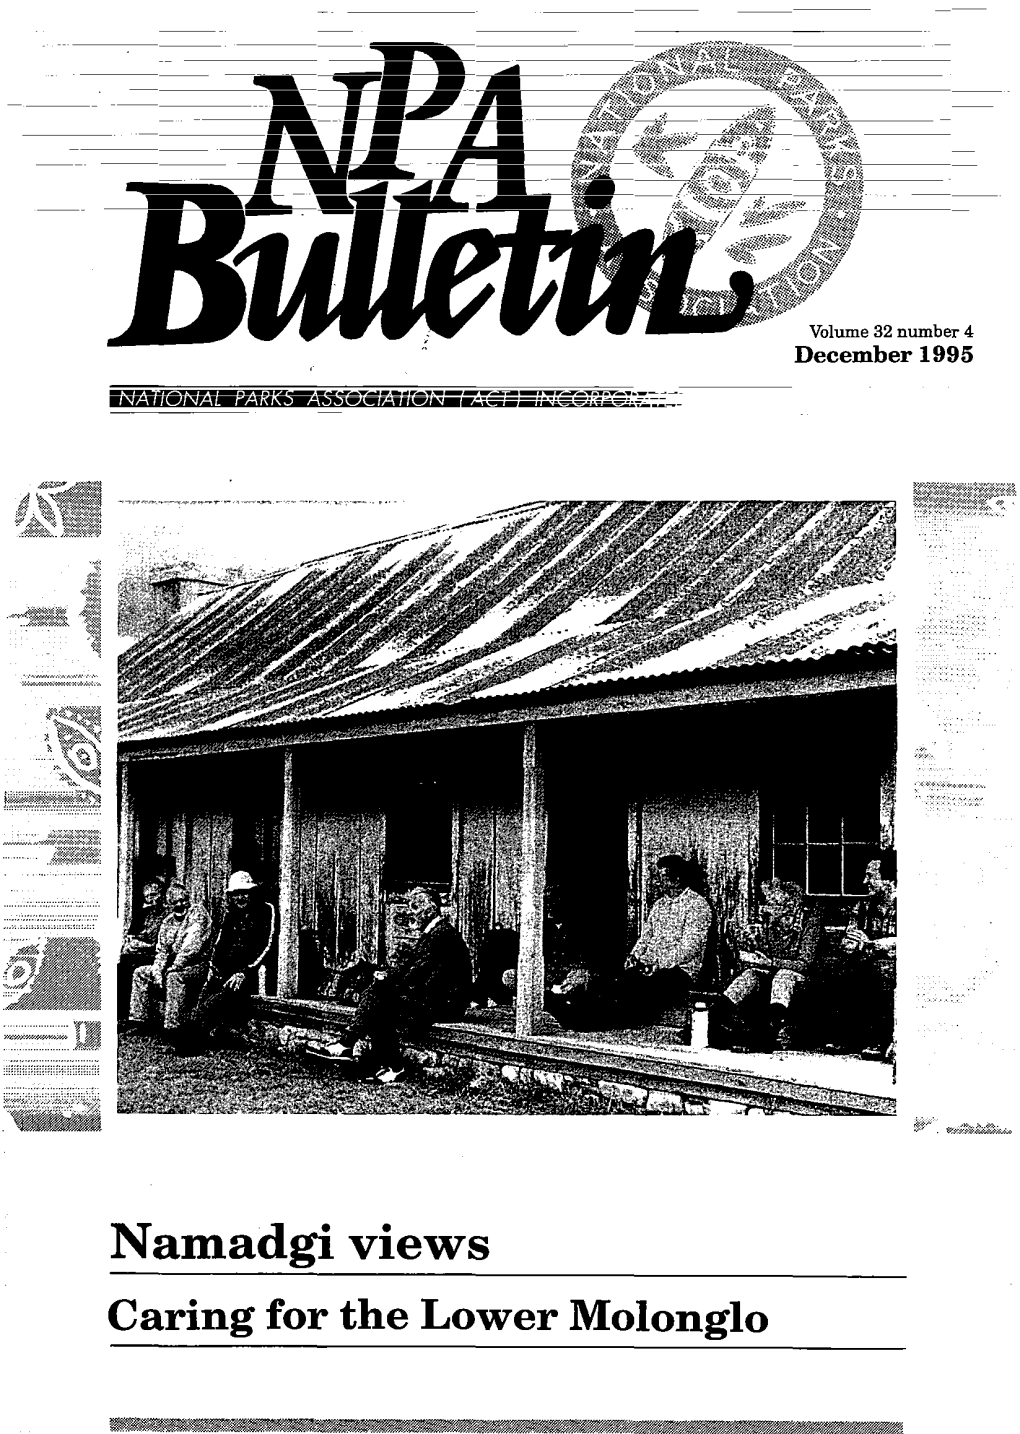 Namadgi Views Caring for the Lower Molonglo NPA BULLETIN Volume 32 Number 4 December 1995